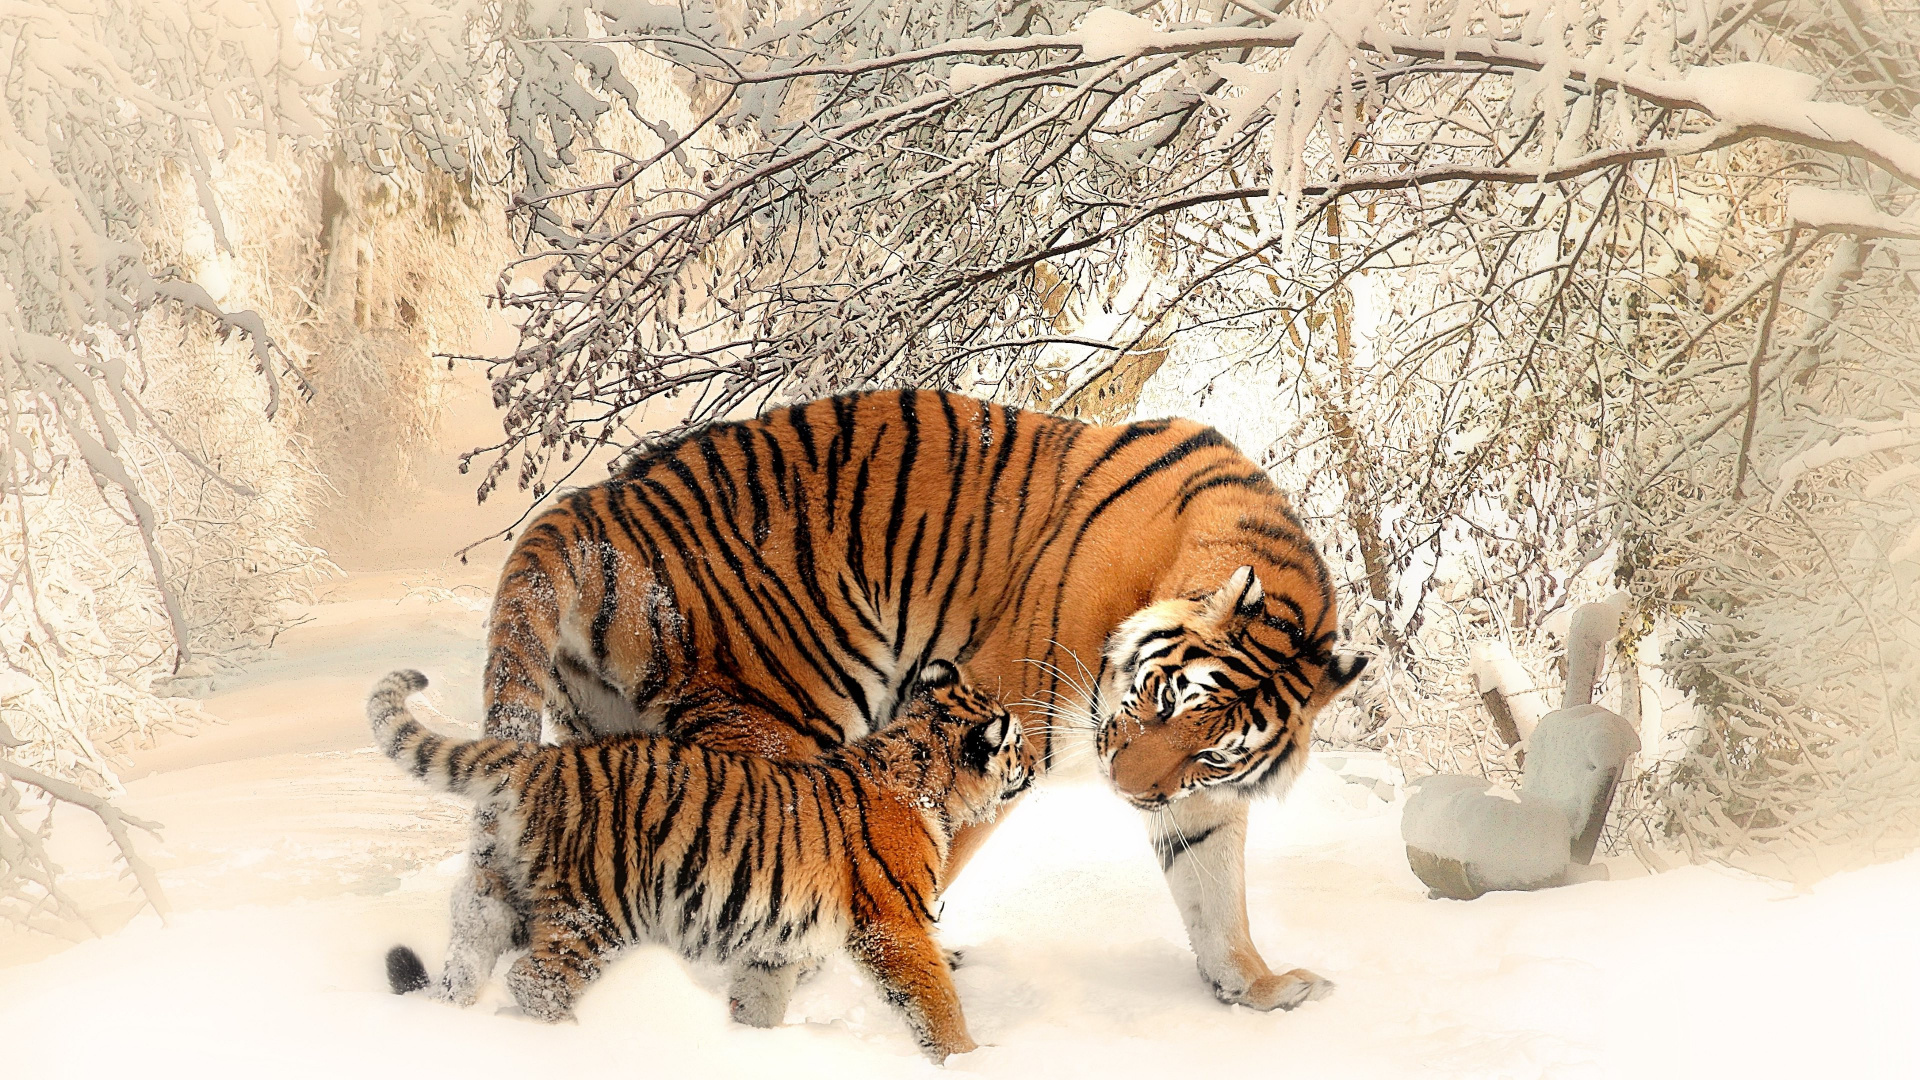 Tiger Walking on Snow Covered Ground During Daytime. Wallpaper in 1920x1080 Resolution